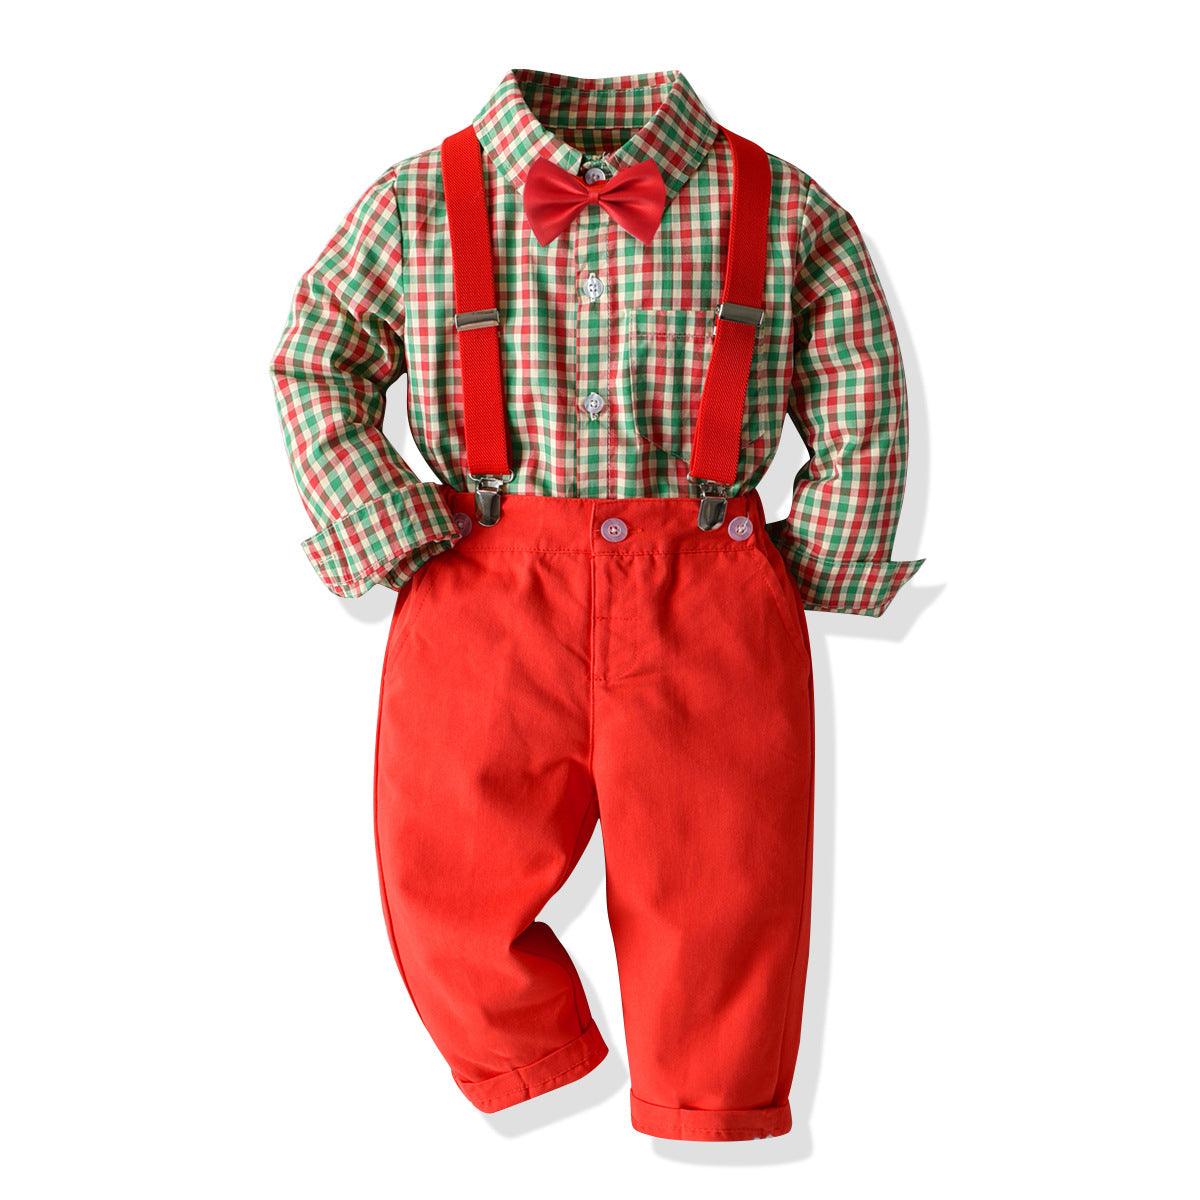 Boys' Plaid Shirt Bow Tie Overalls Party Dress - TOYCENT 